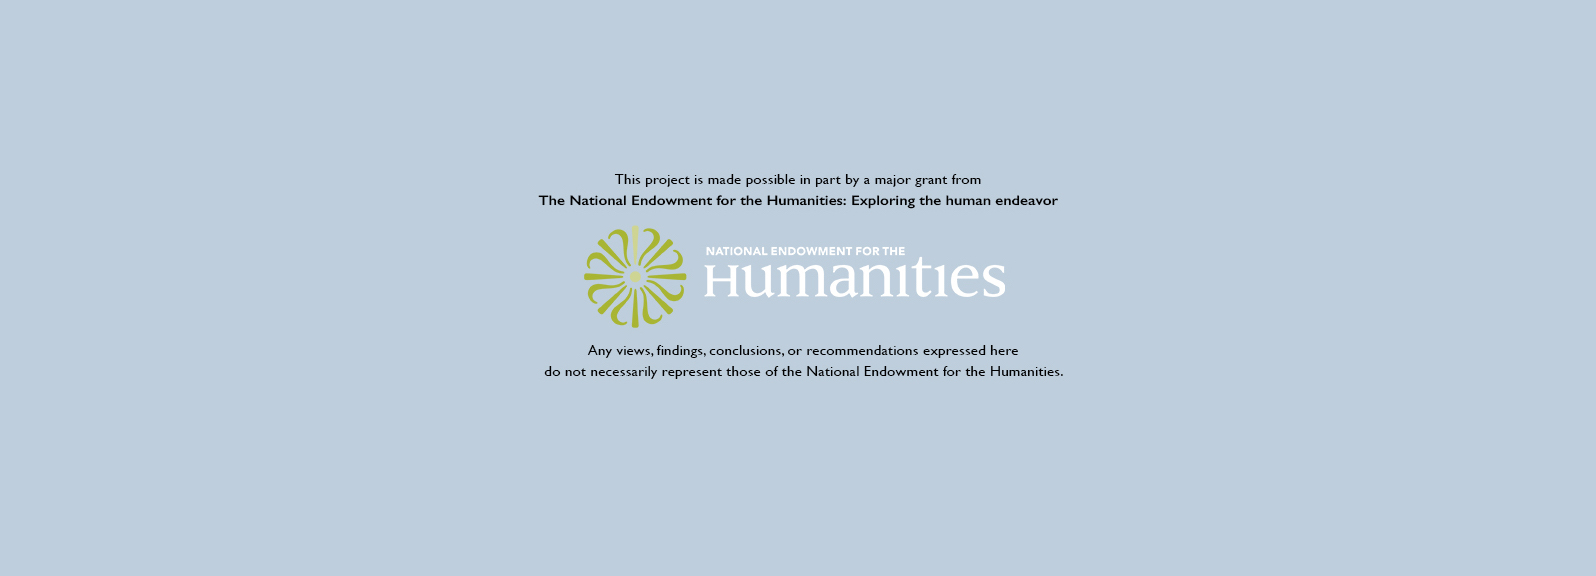 Acknowledgment of grant from National Endowment for the Humanities